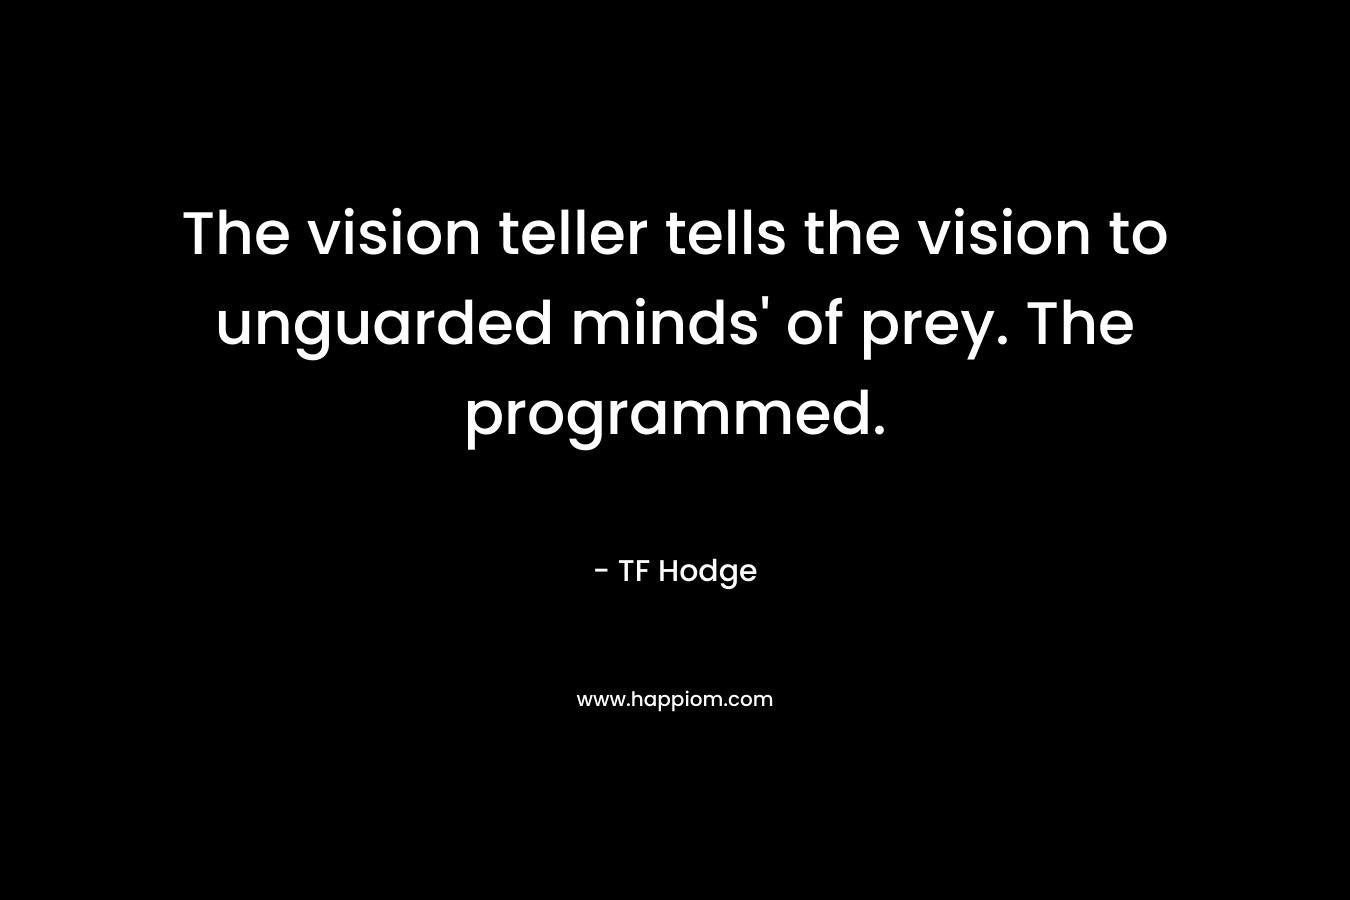 The vision teller tells the vision to unguarded minds' of prey. The programmed.